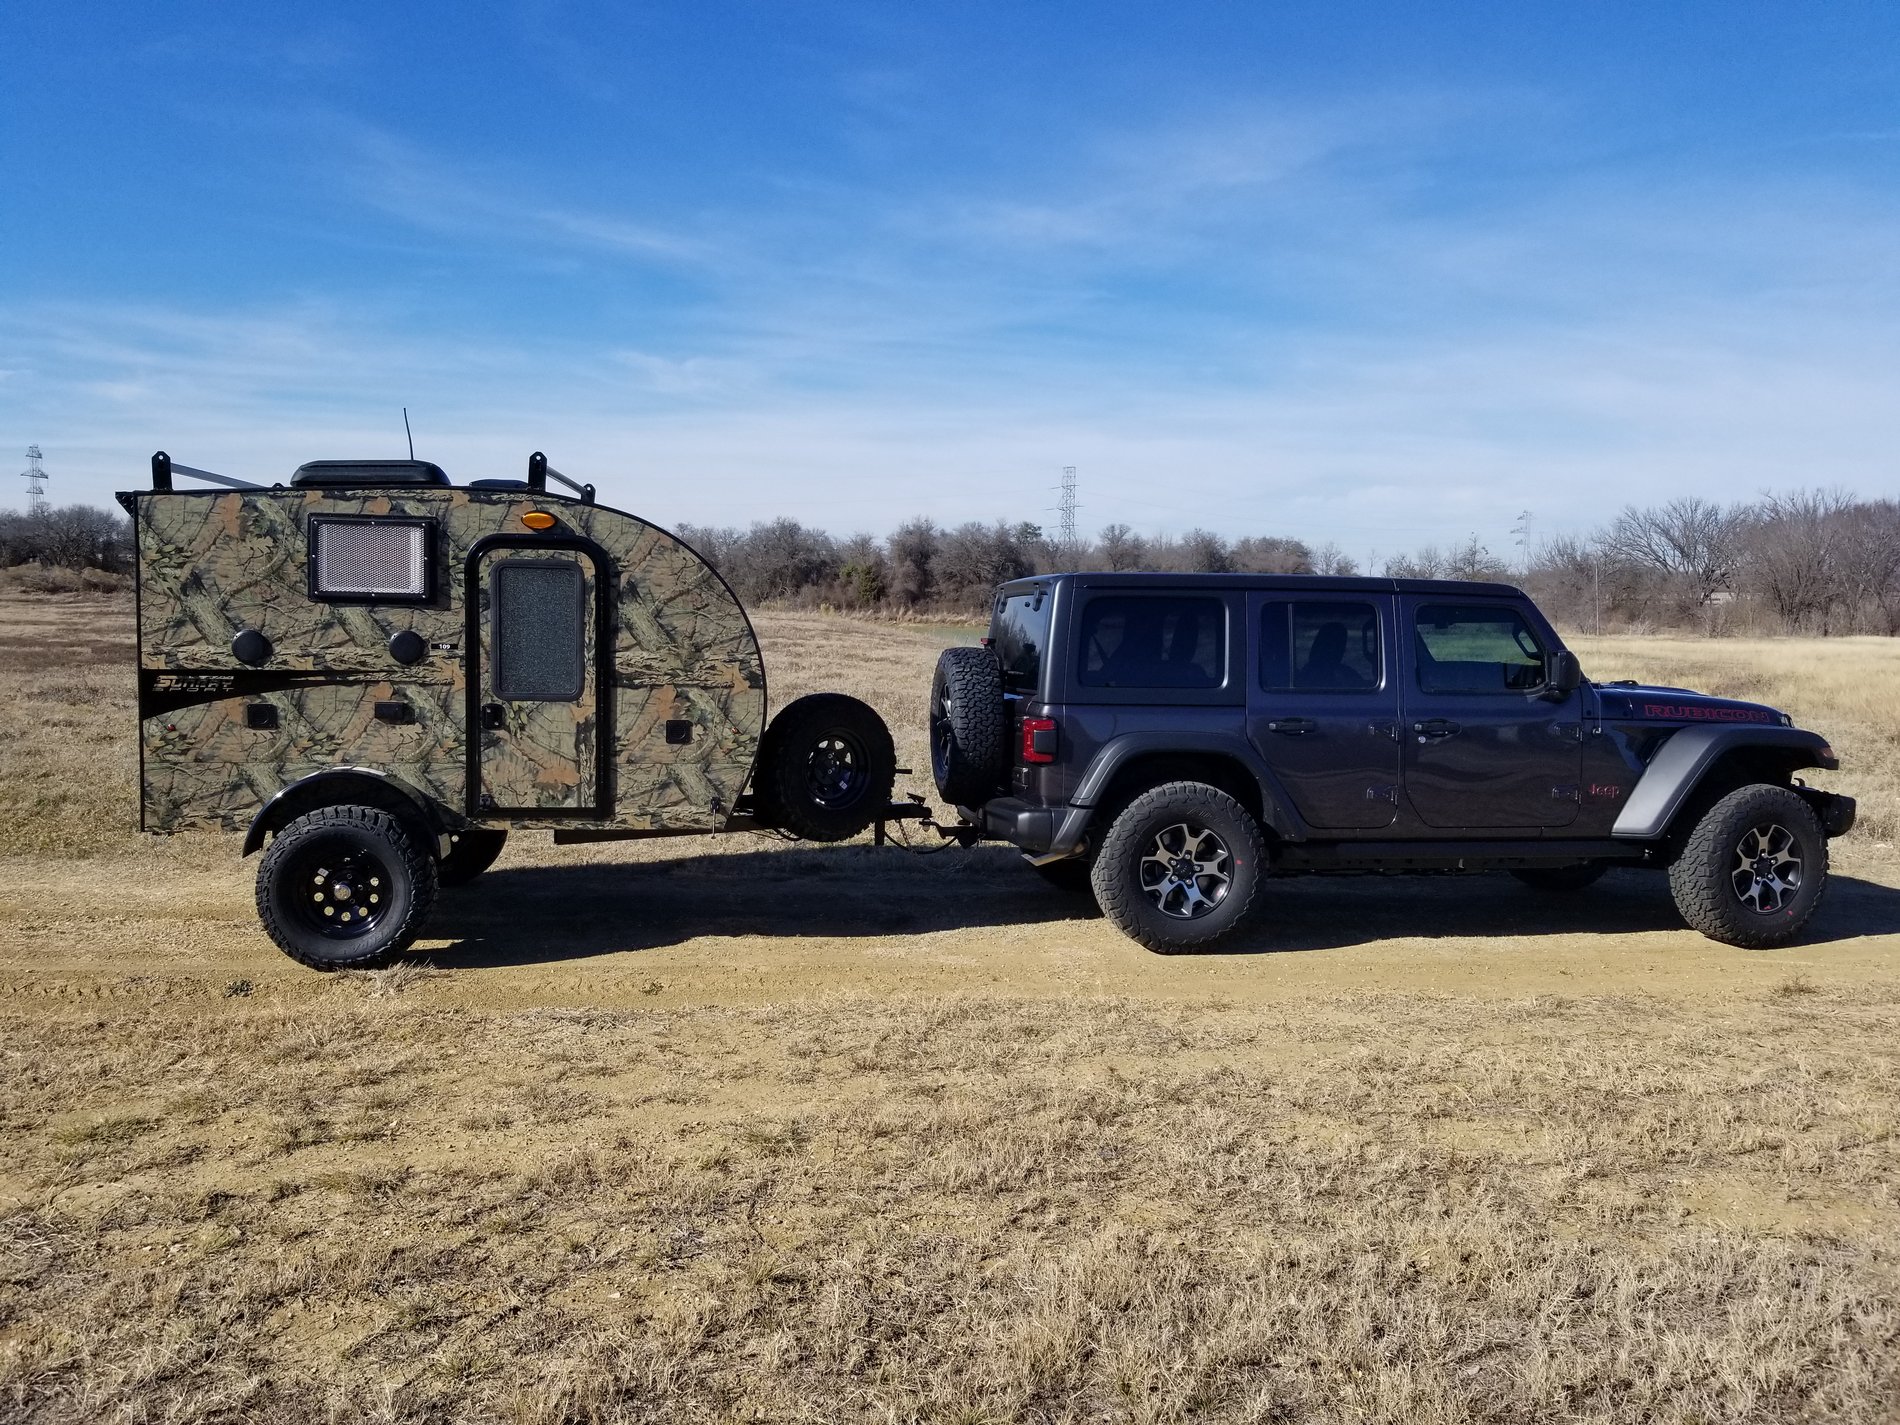 What type & weight travel trailers are you towing with 2018 4dr Wrangler? | Jeep  Wrangler Forums (JL / JLU) - Rubicon, Sahara, Sport, 4xe, 392 -  